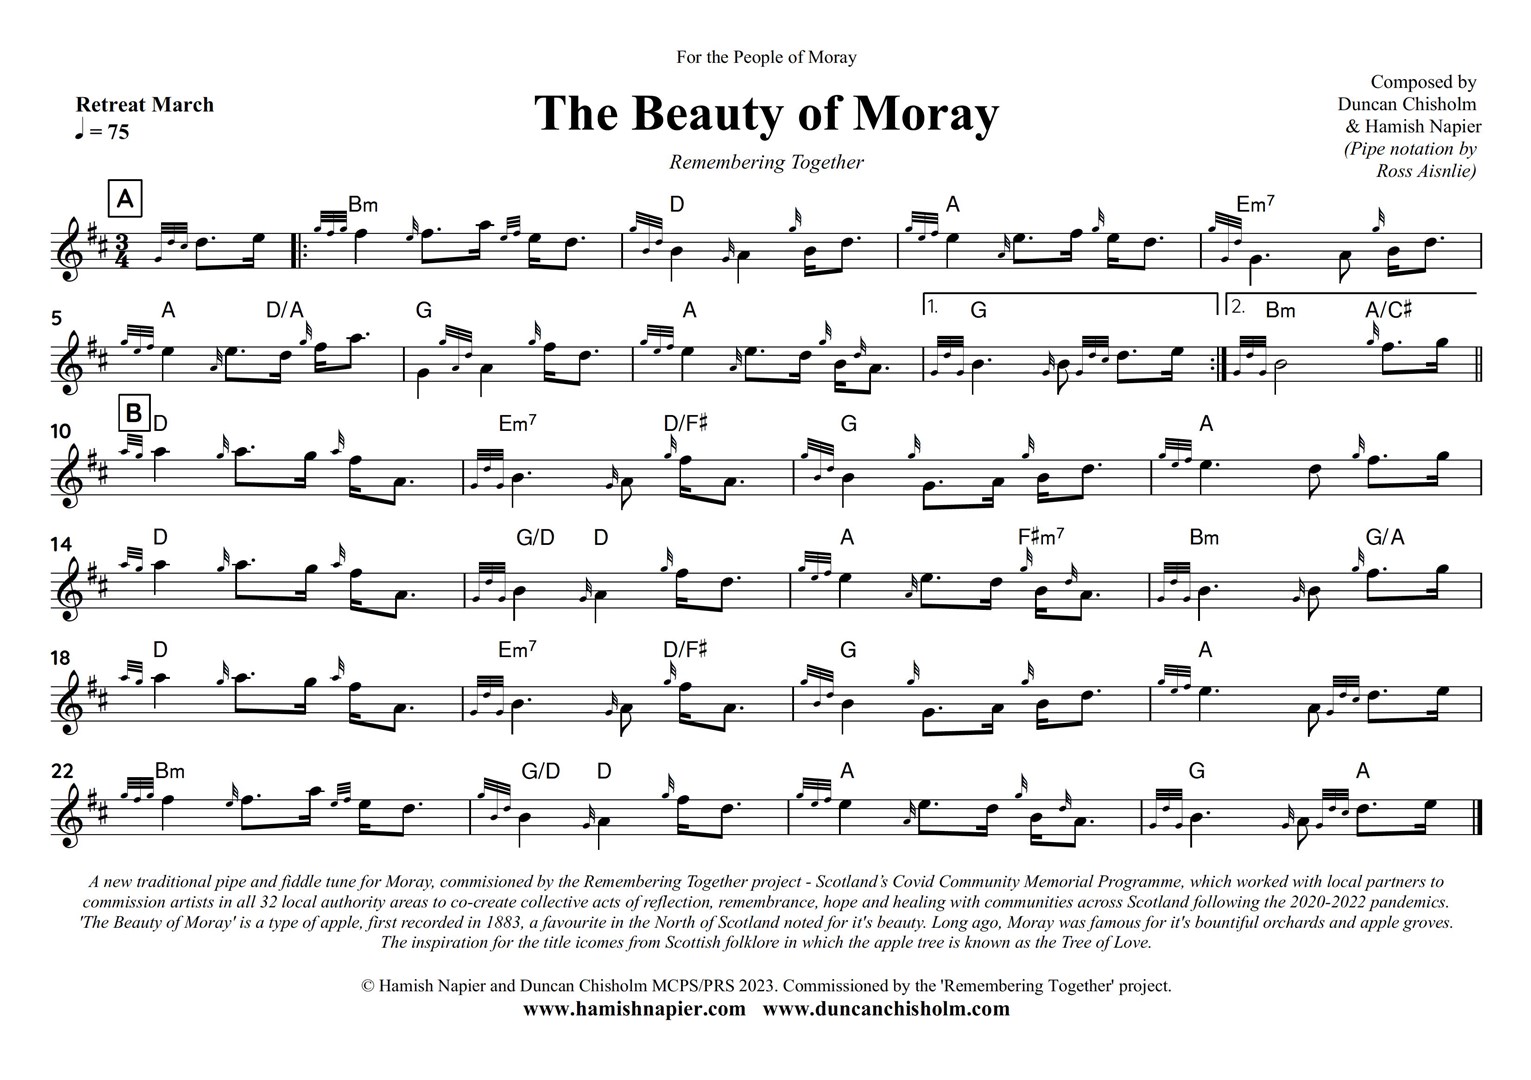 The full score of The Beauty of Moray.